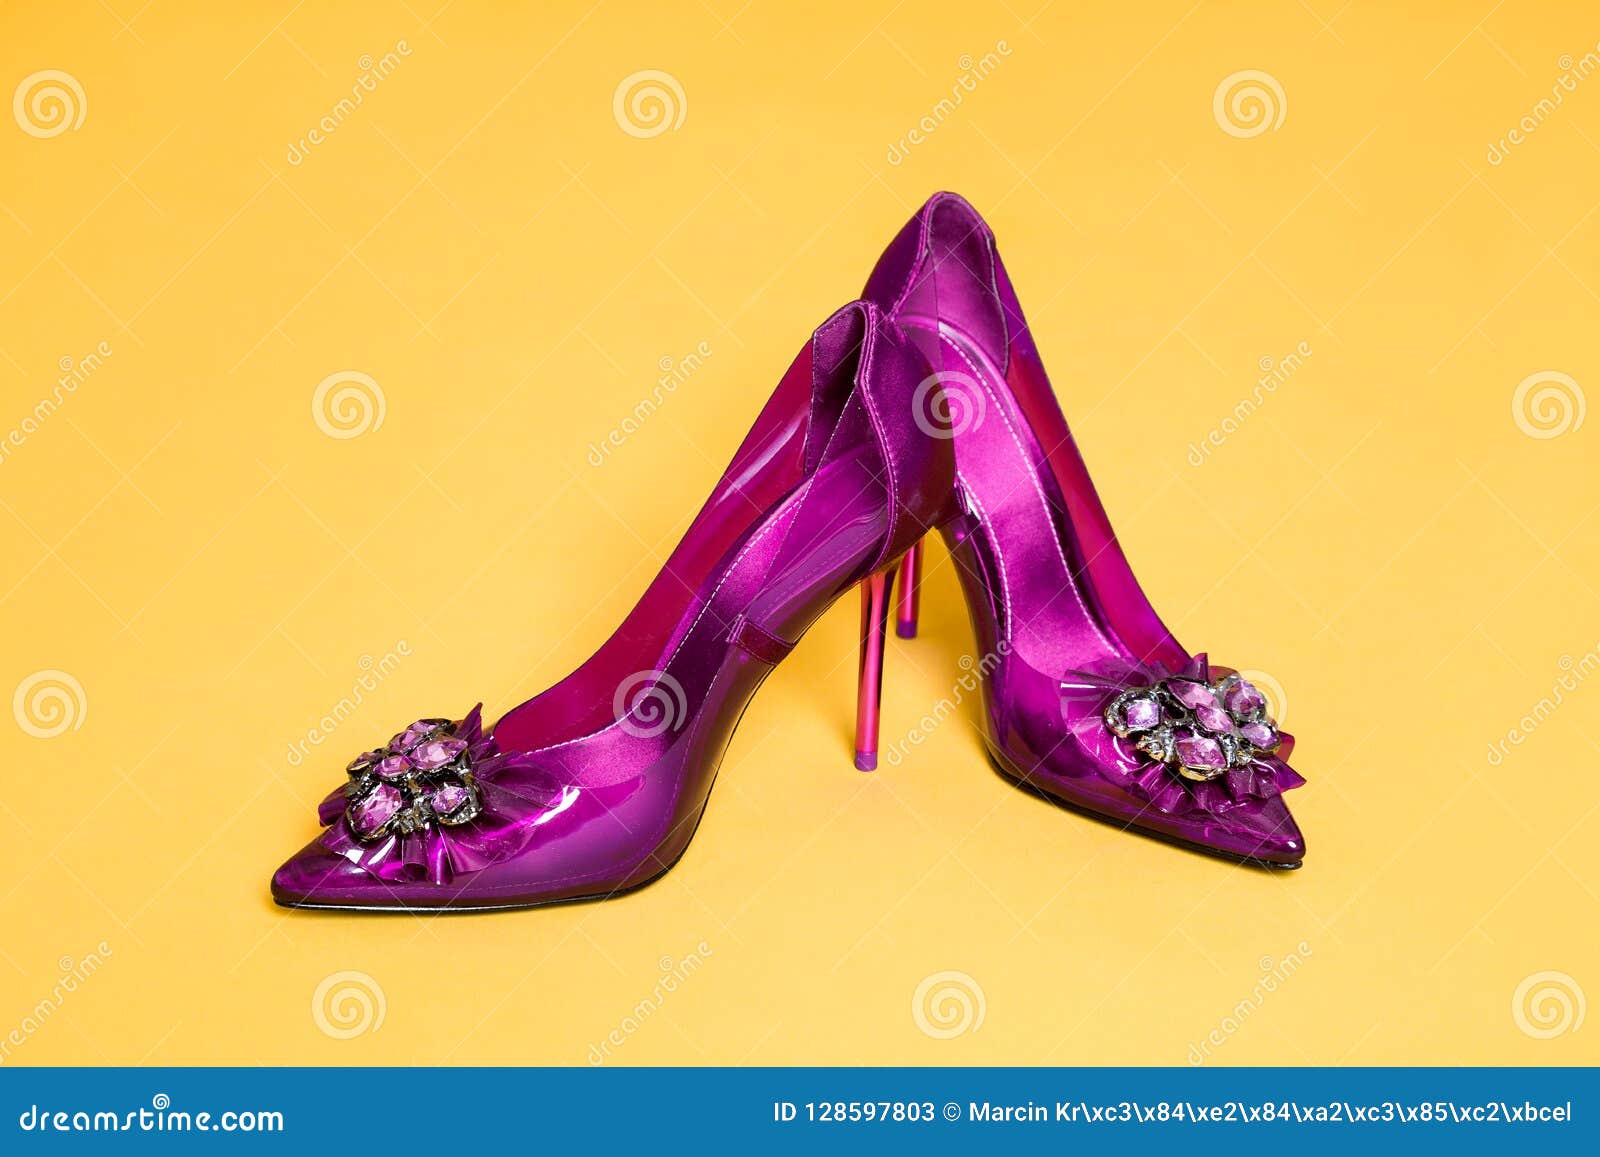 Elegant Women S Shoes With High Heel And Glamor Decorations On A